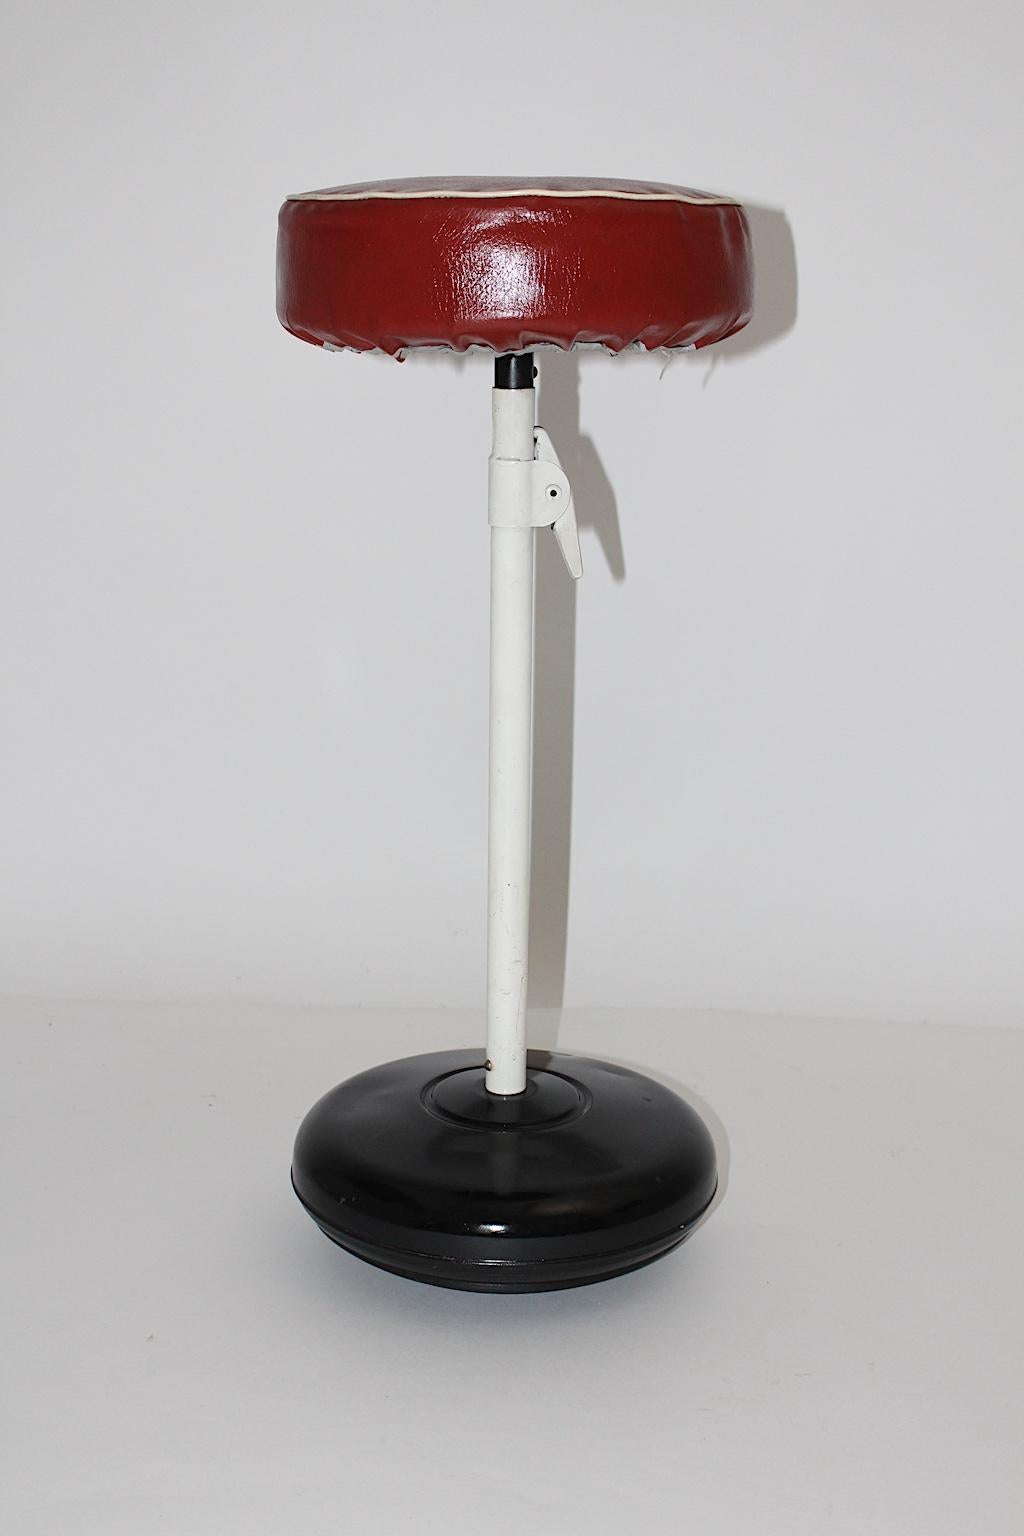 A Mid-Century Modern vintage black and white metal rocking stool, which was designed and made circa 1950s in Austria.
The seat was covered with red faux leather, while the round bottom was made of black rubber.
Also the stool has an adjustable